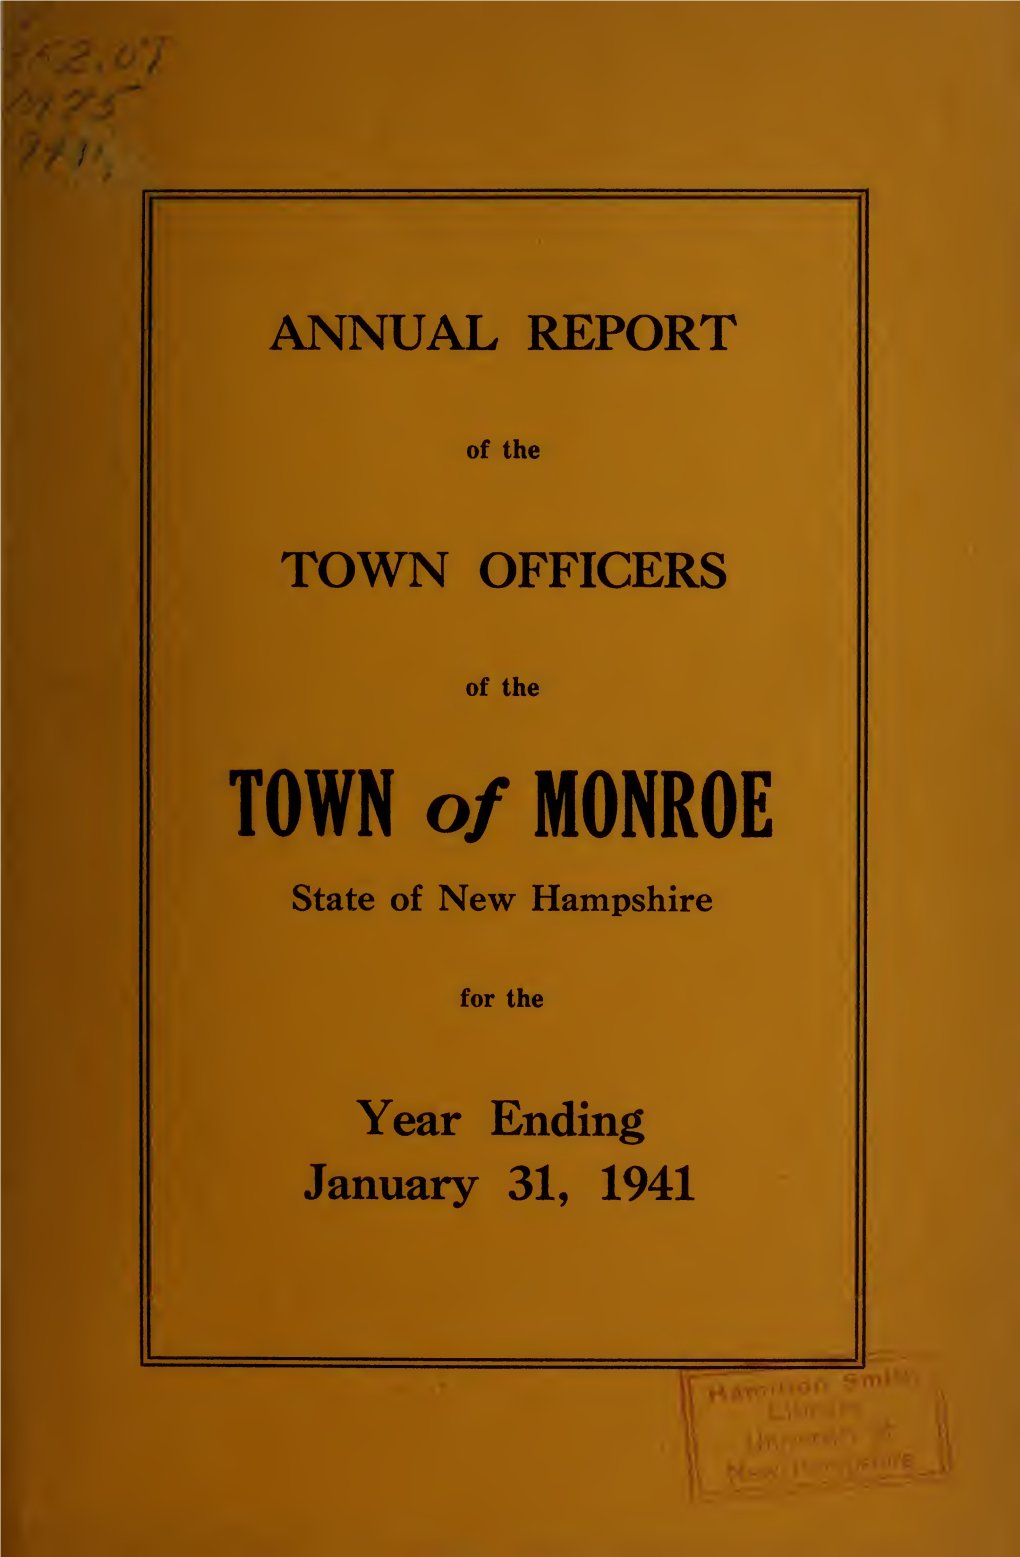 Annual Report of the Town of Monroe, New Hampshire